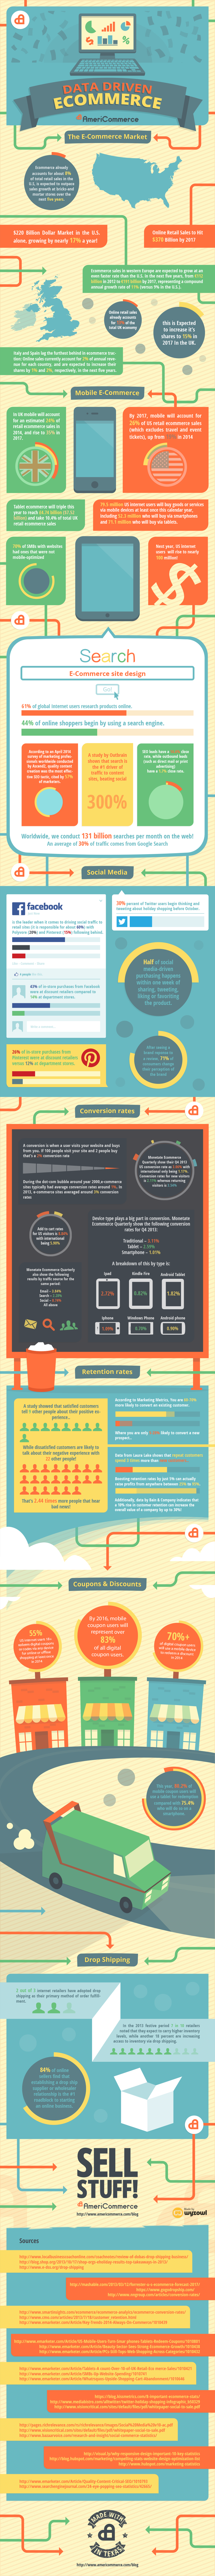  Data Driven Ecommerce - Infographic